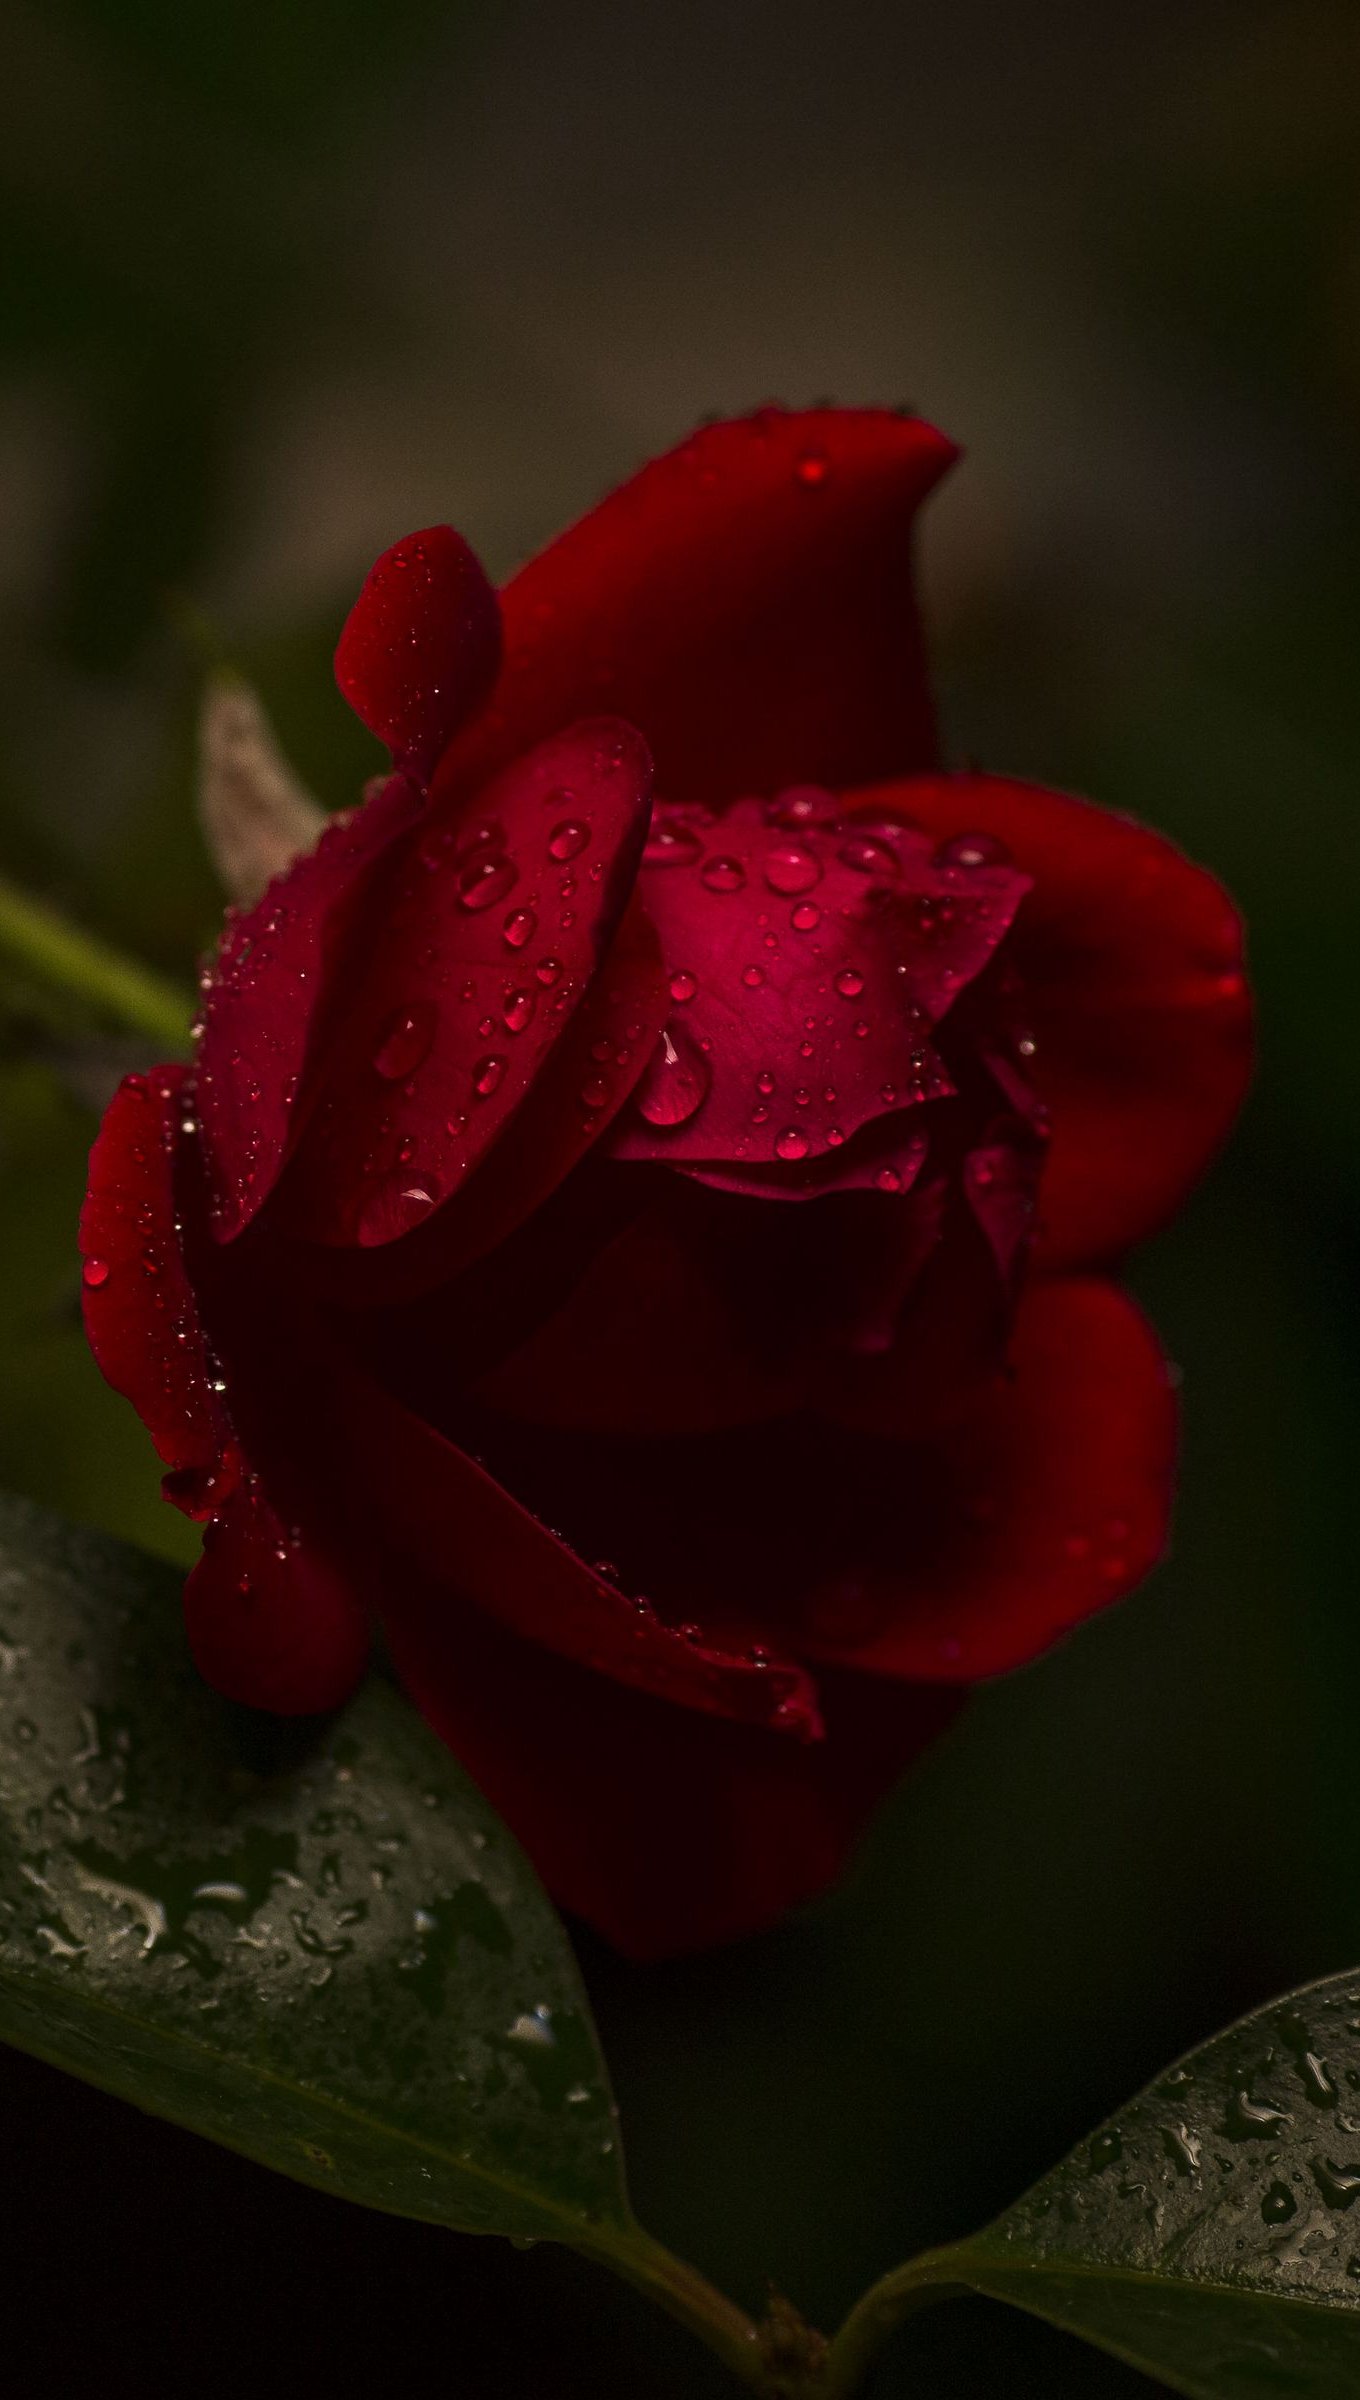 Red rose with water drops Wallpaper 4k Ultra HD ID:10348